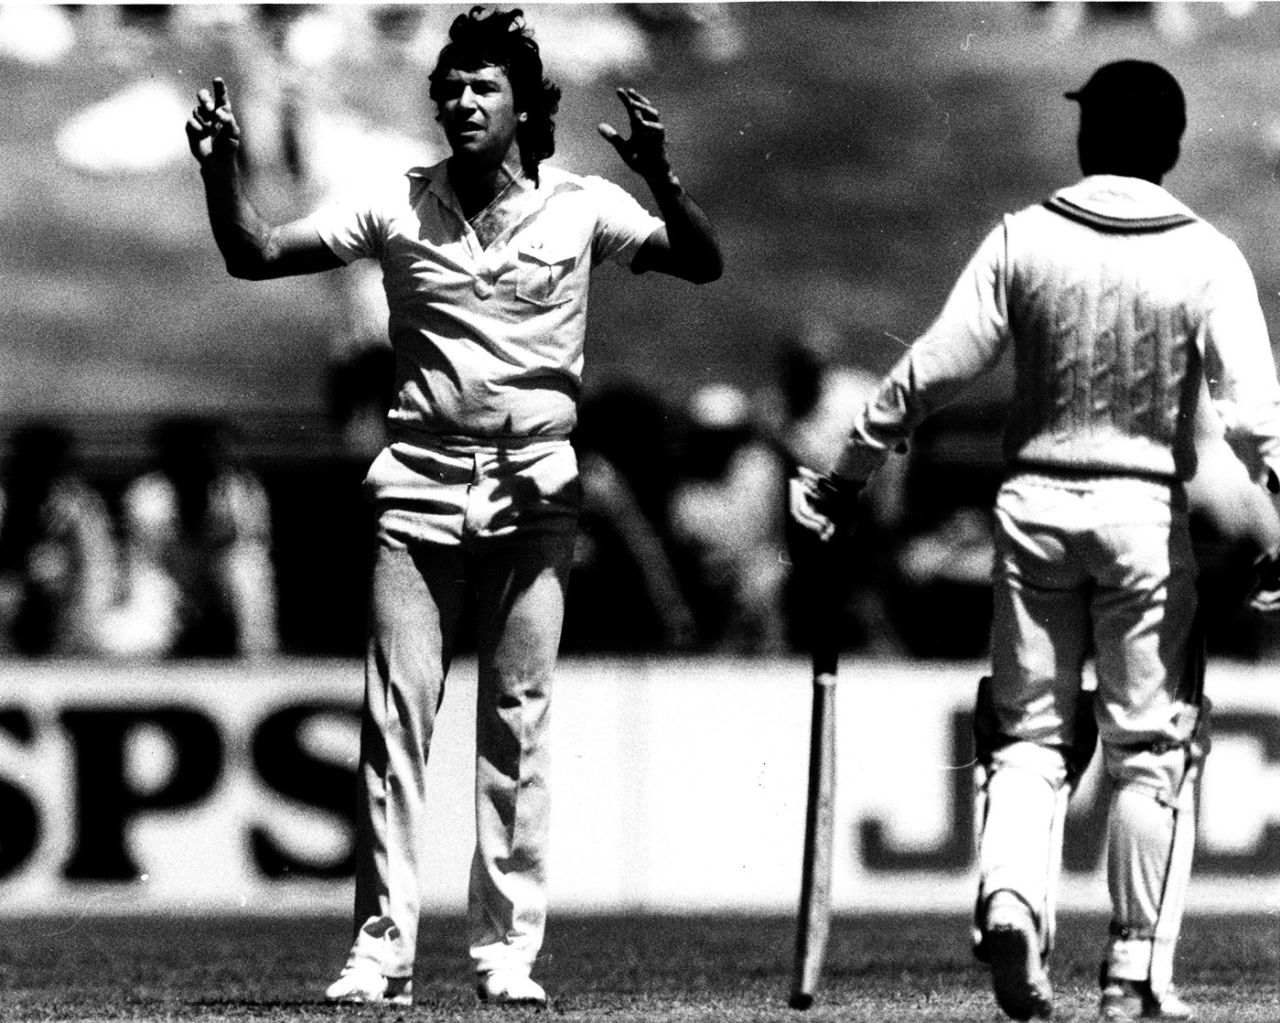 Imran Khan appeals for Richie Richardson's wicket. New South Wales v West Indians, Sydney, 2nd day, November 17, 1984